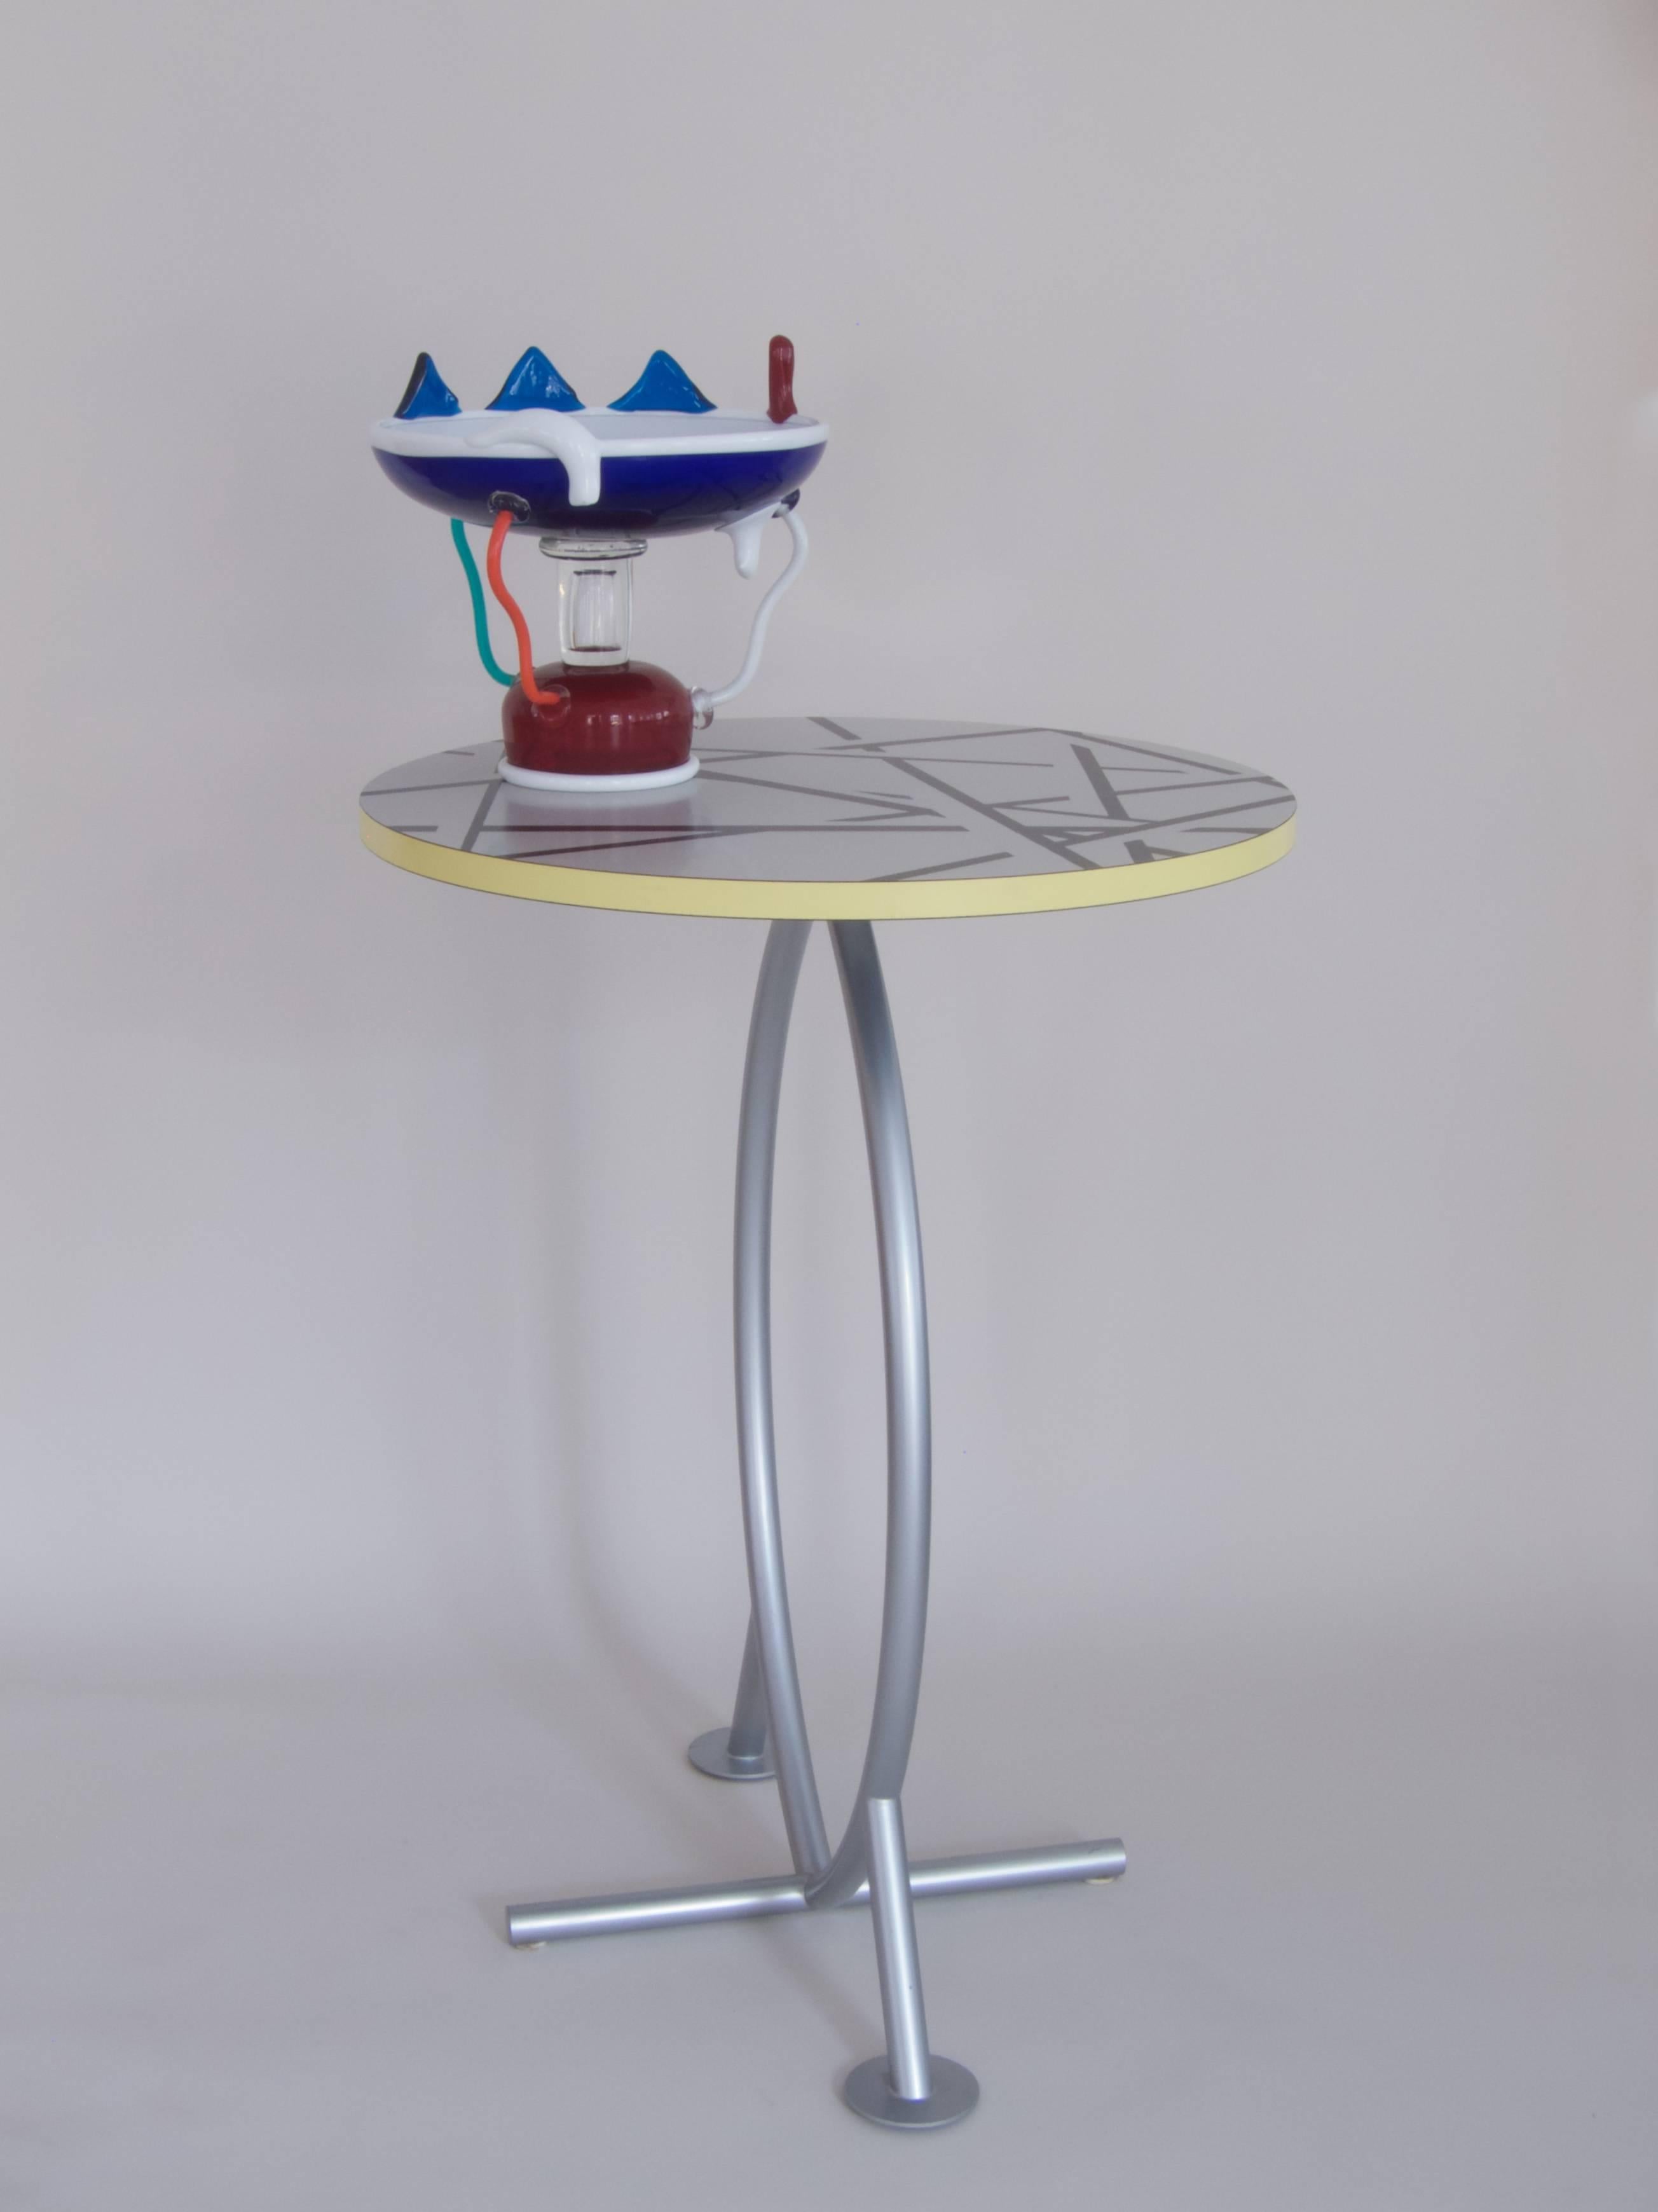 Memphis Group Occasional Table “Cairo” by Michele De Lucchi For Sale